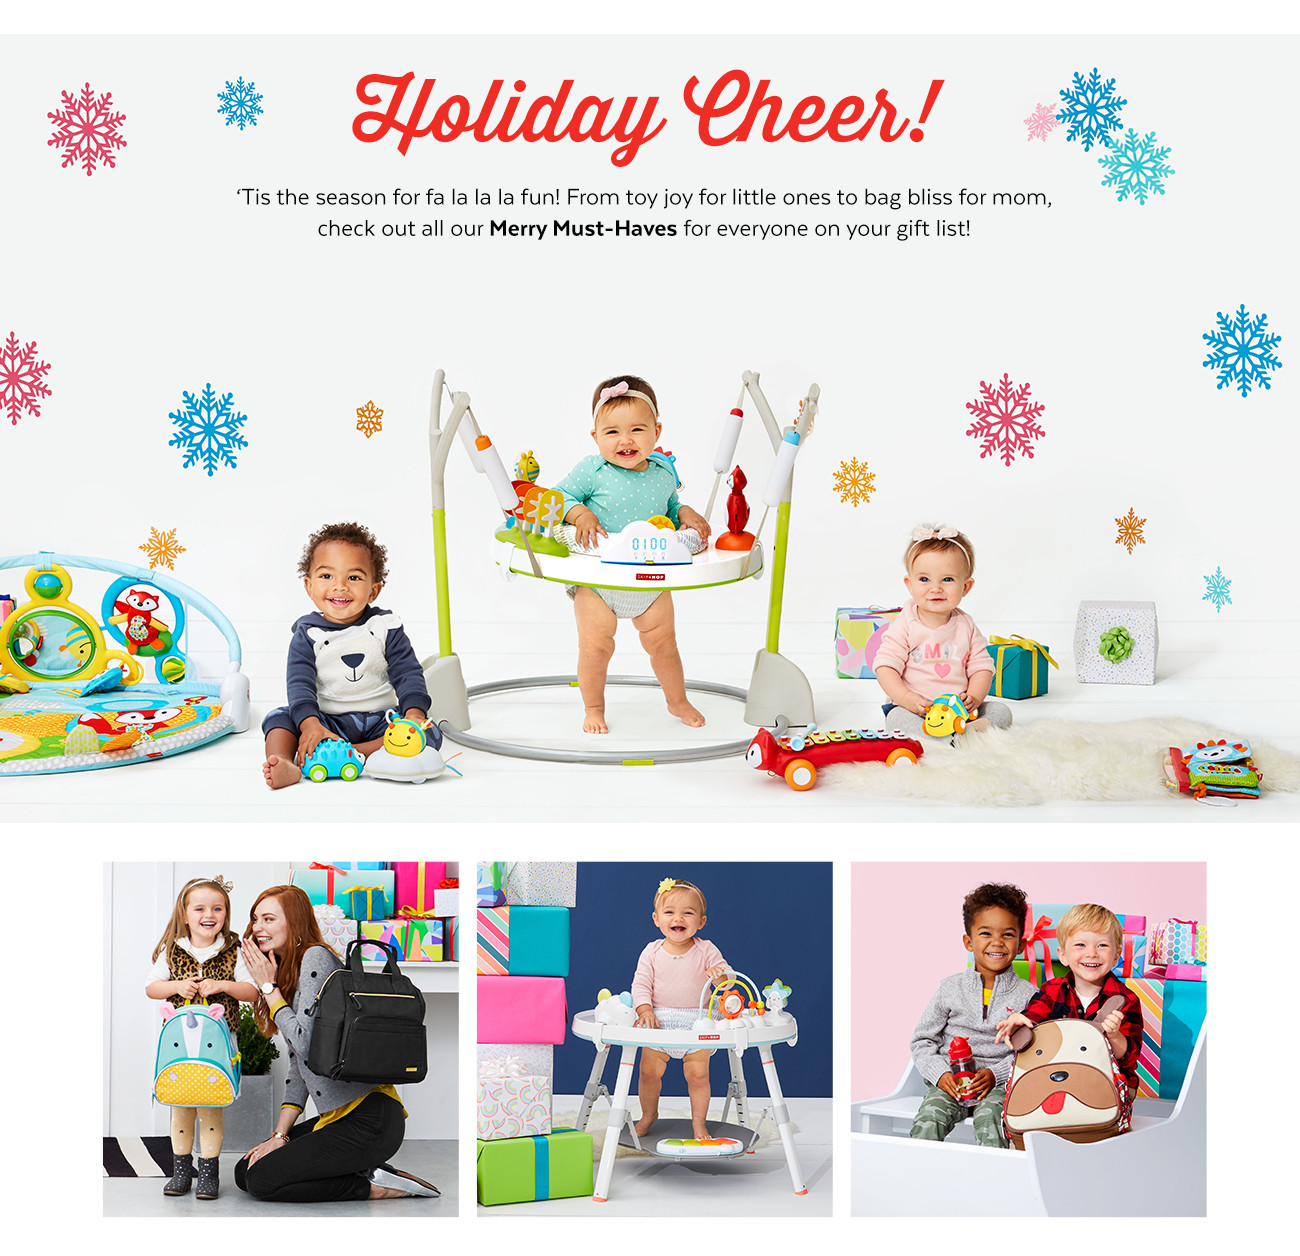 Holiday Cheer! Tis the season for fa la la la fun! From toy for little ones to bag bliss for mom, check out all our Merry Must-Haves for everyone on your gift list!